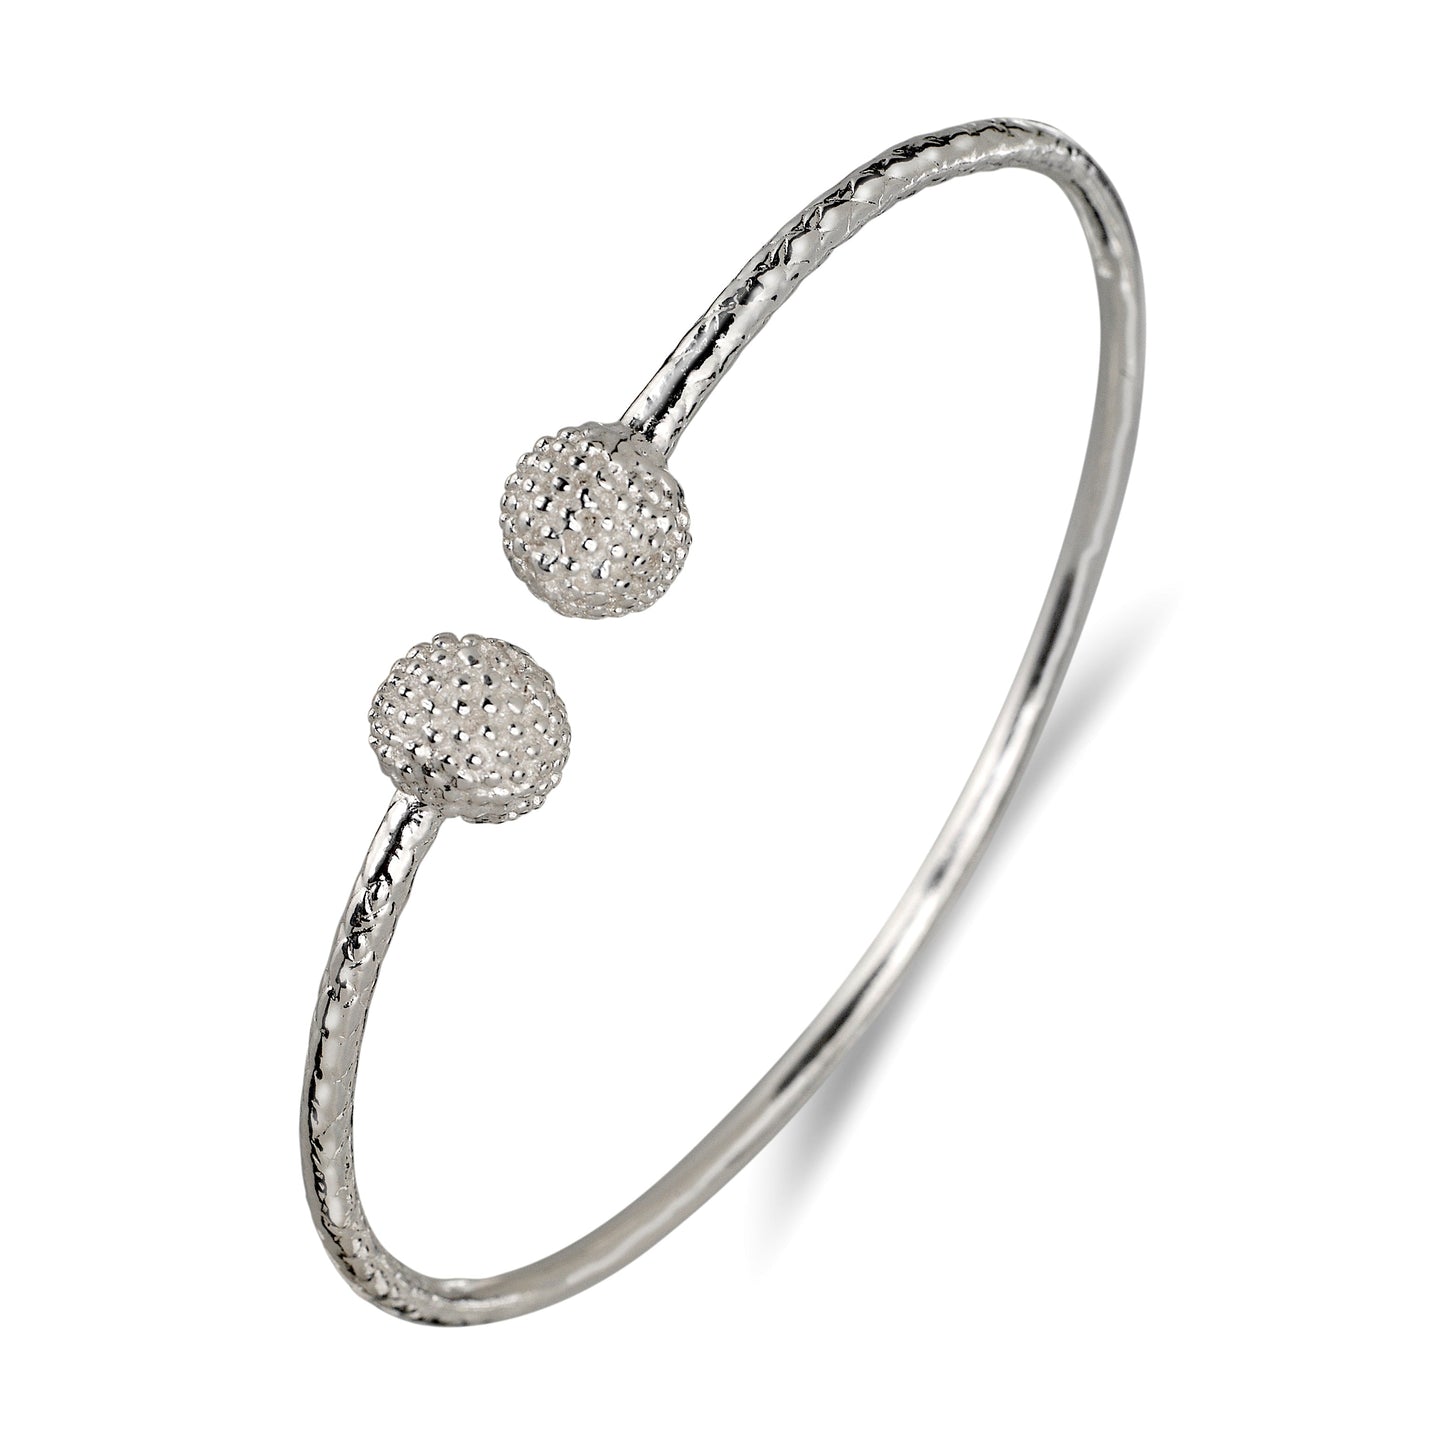 Better Jewelry Textured Ball .925 Sterling Silver West Indian Bangle, 1 piece